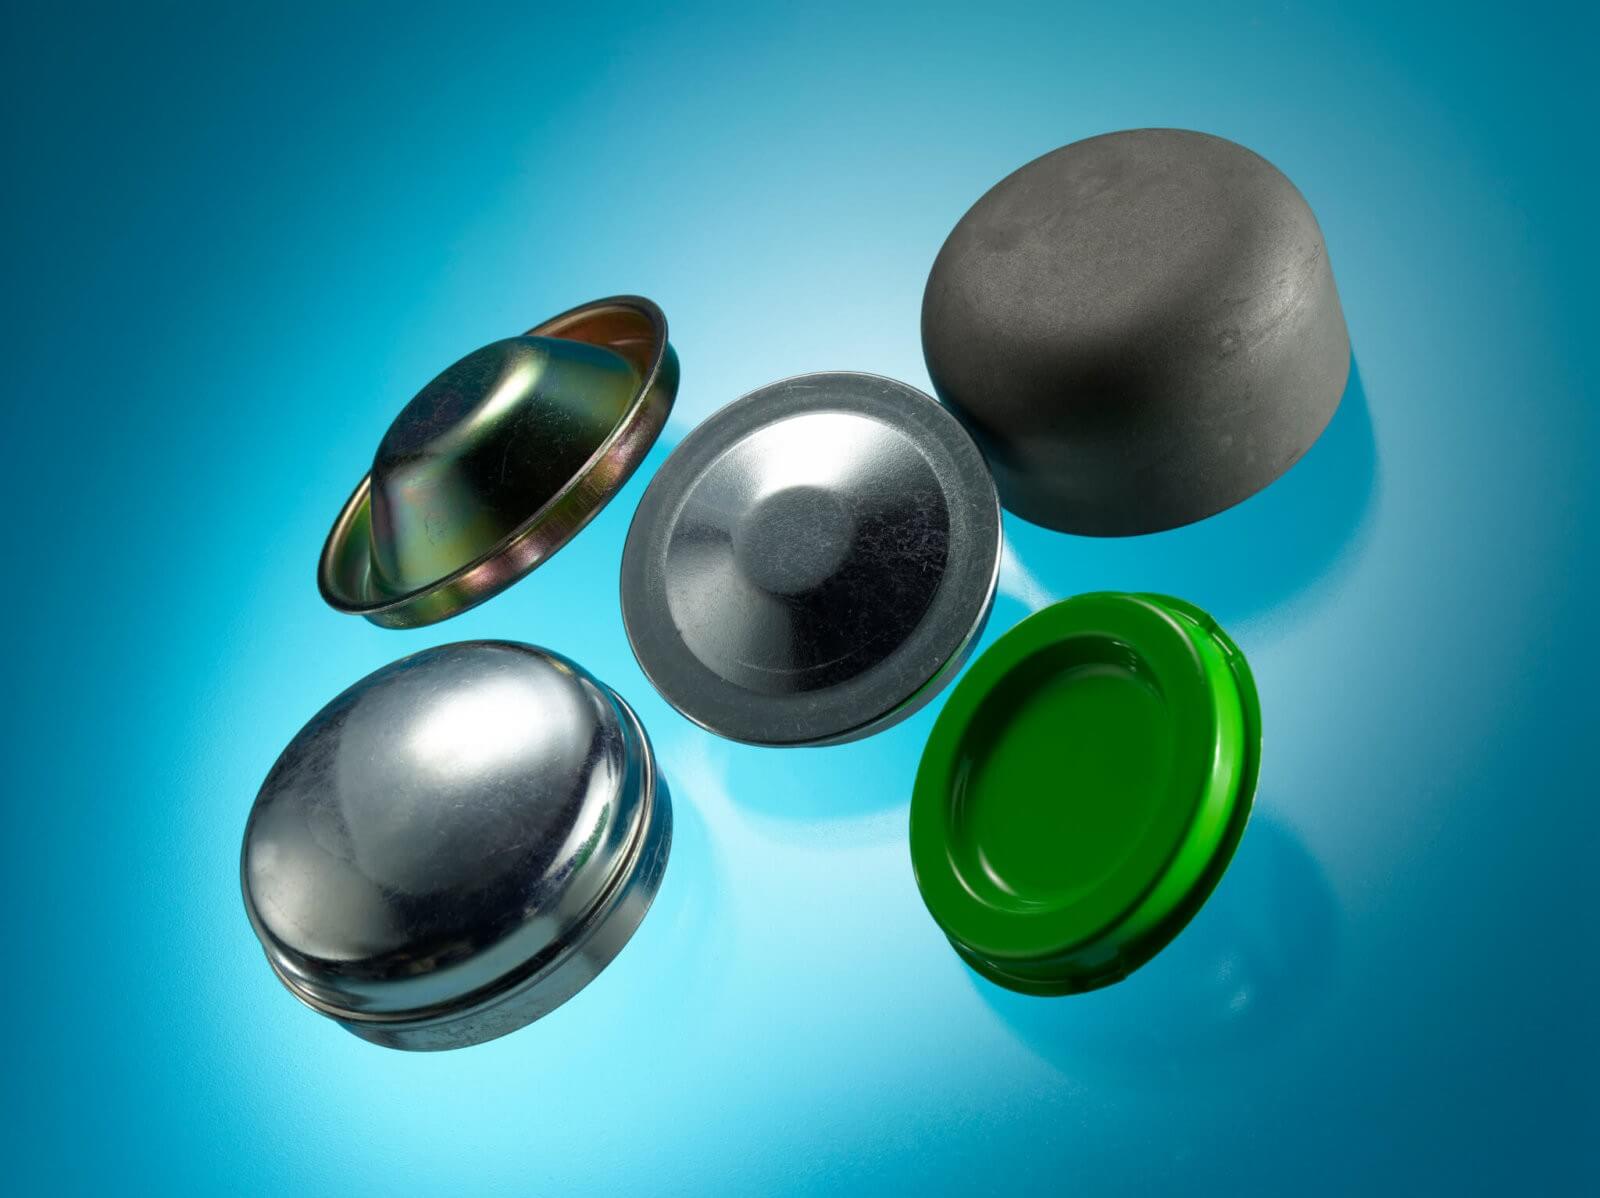 Automotive Parts Caps. Different cap and covers with black powder coating, Zinc and Clear Passivate or Zinc and Colour Passivate surface finishes.